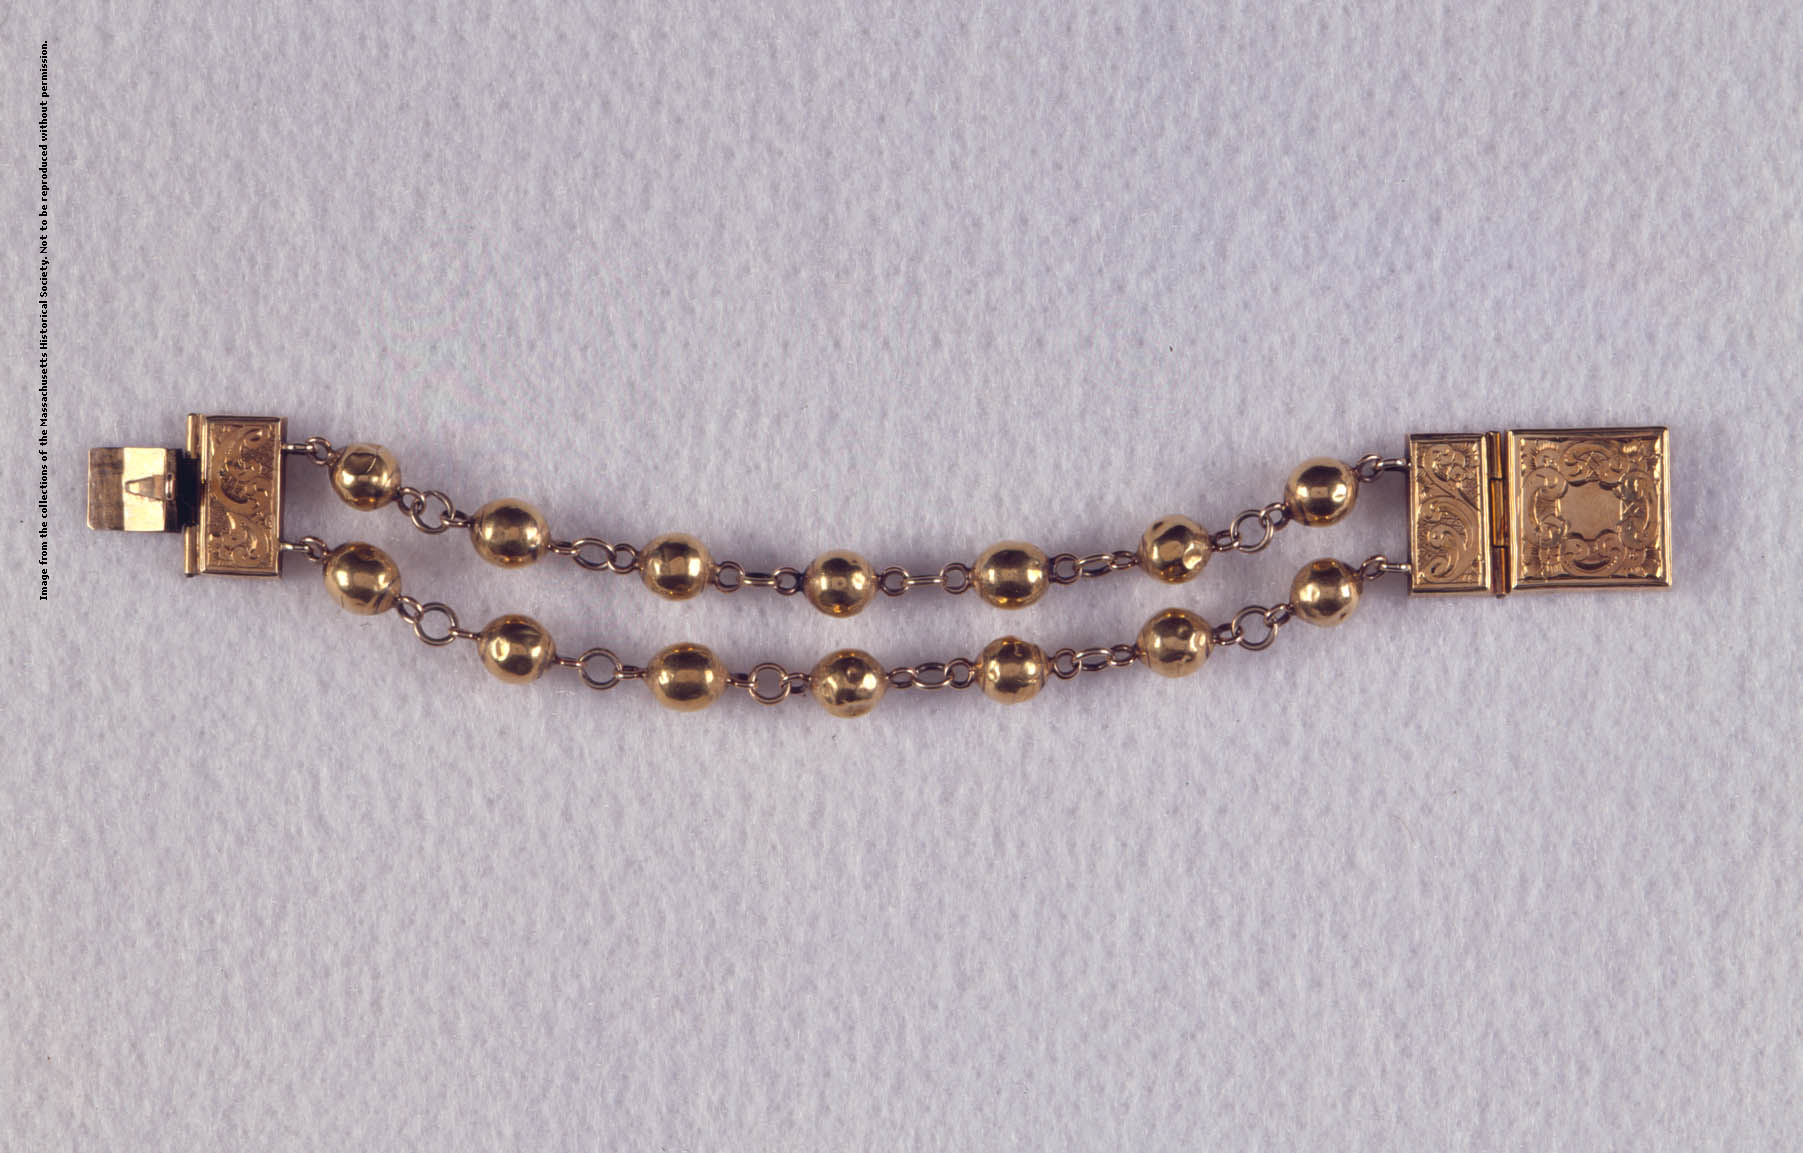 Photo of a bracelet made of gold beads